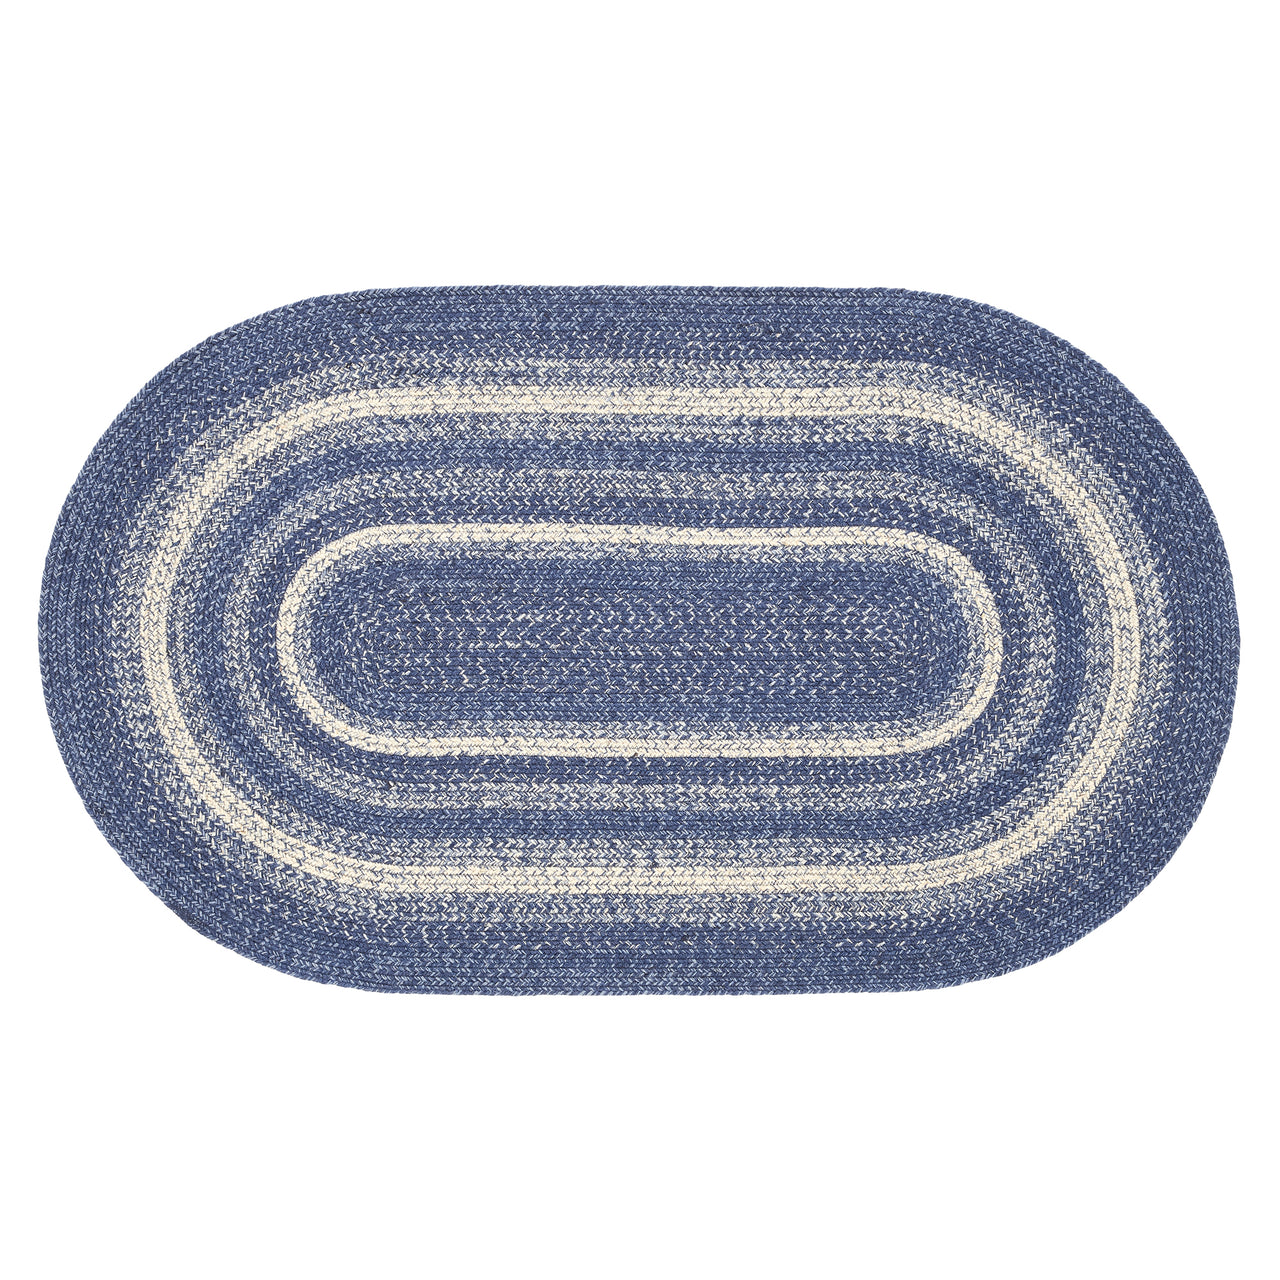 Great Falls Jute Braided Rug Oval with Rug Pad 3'x5' VHC Brands